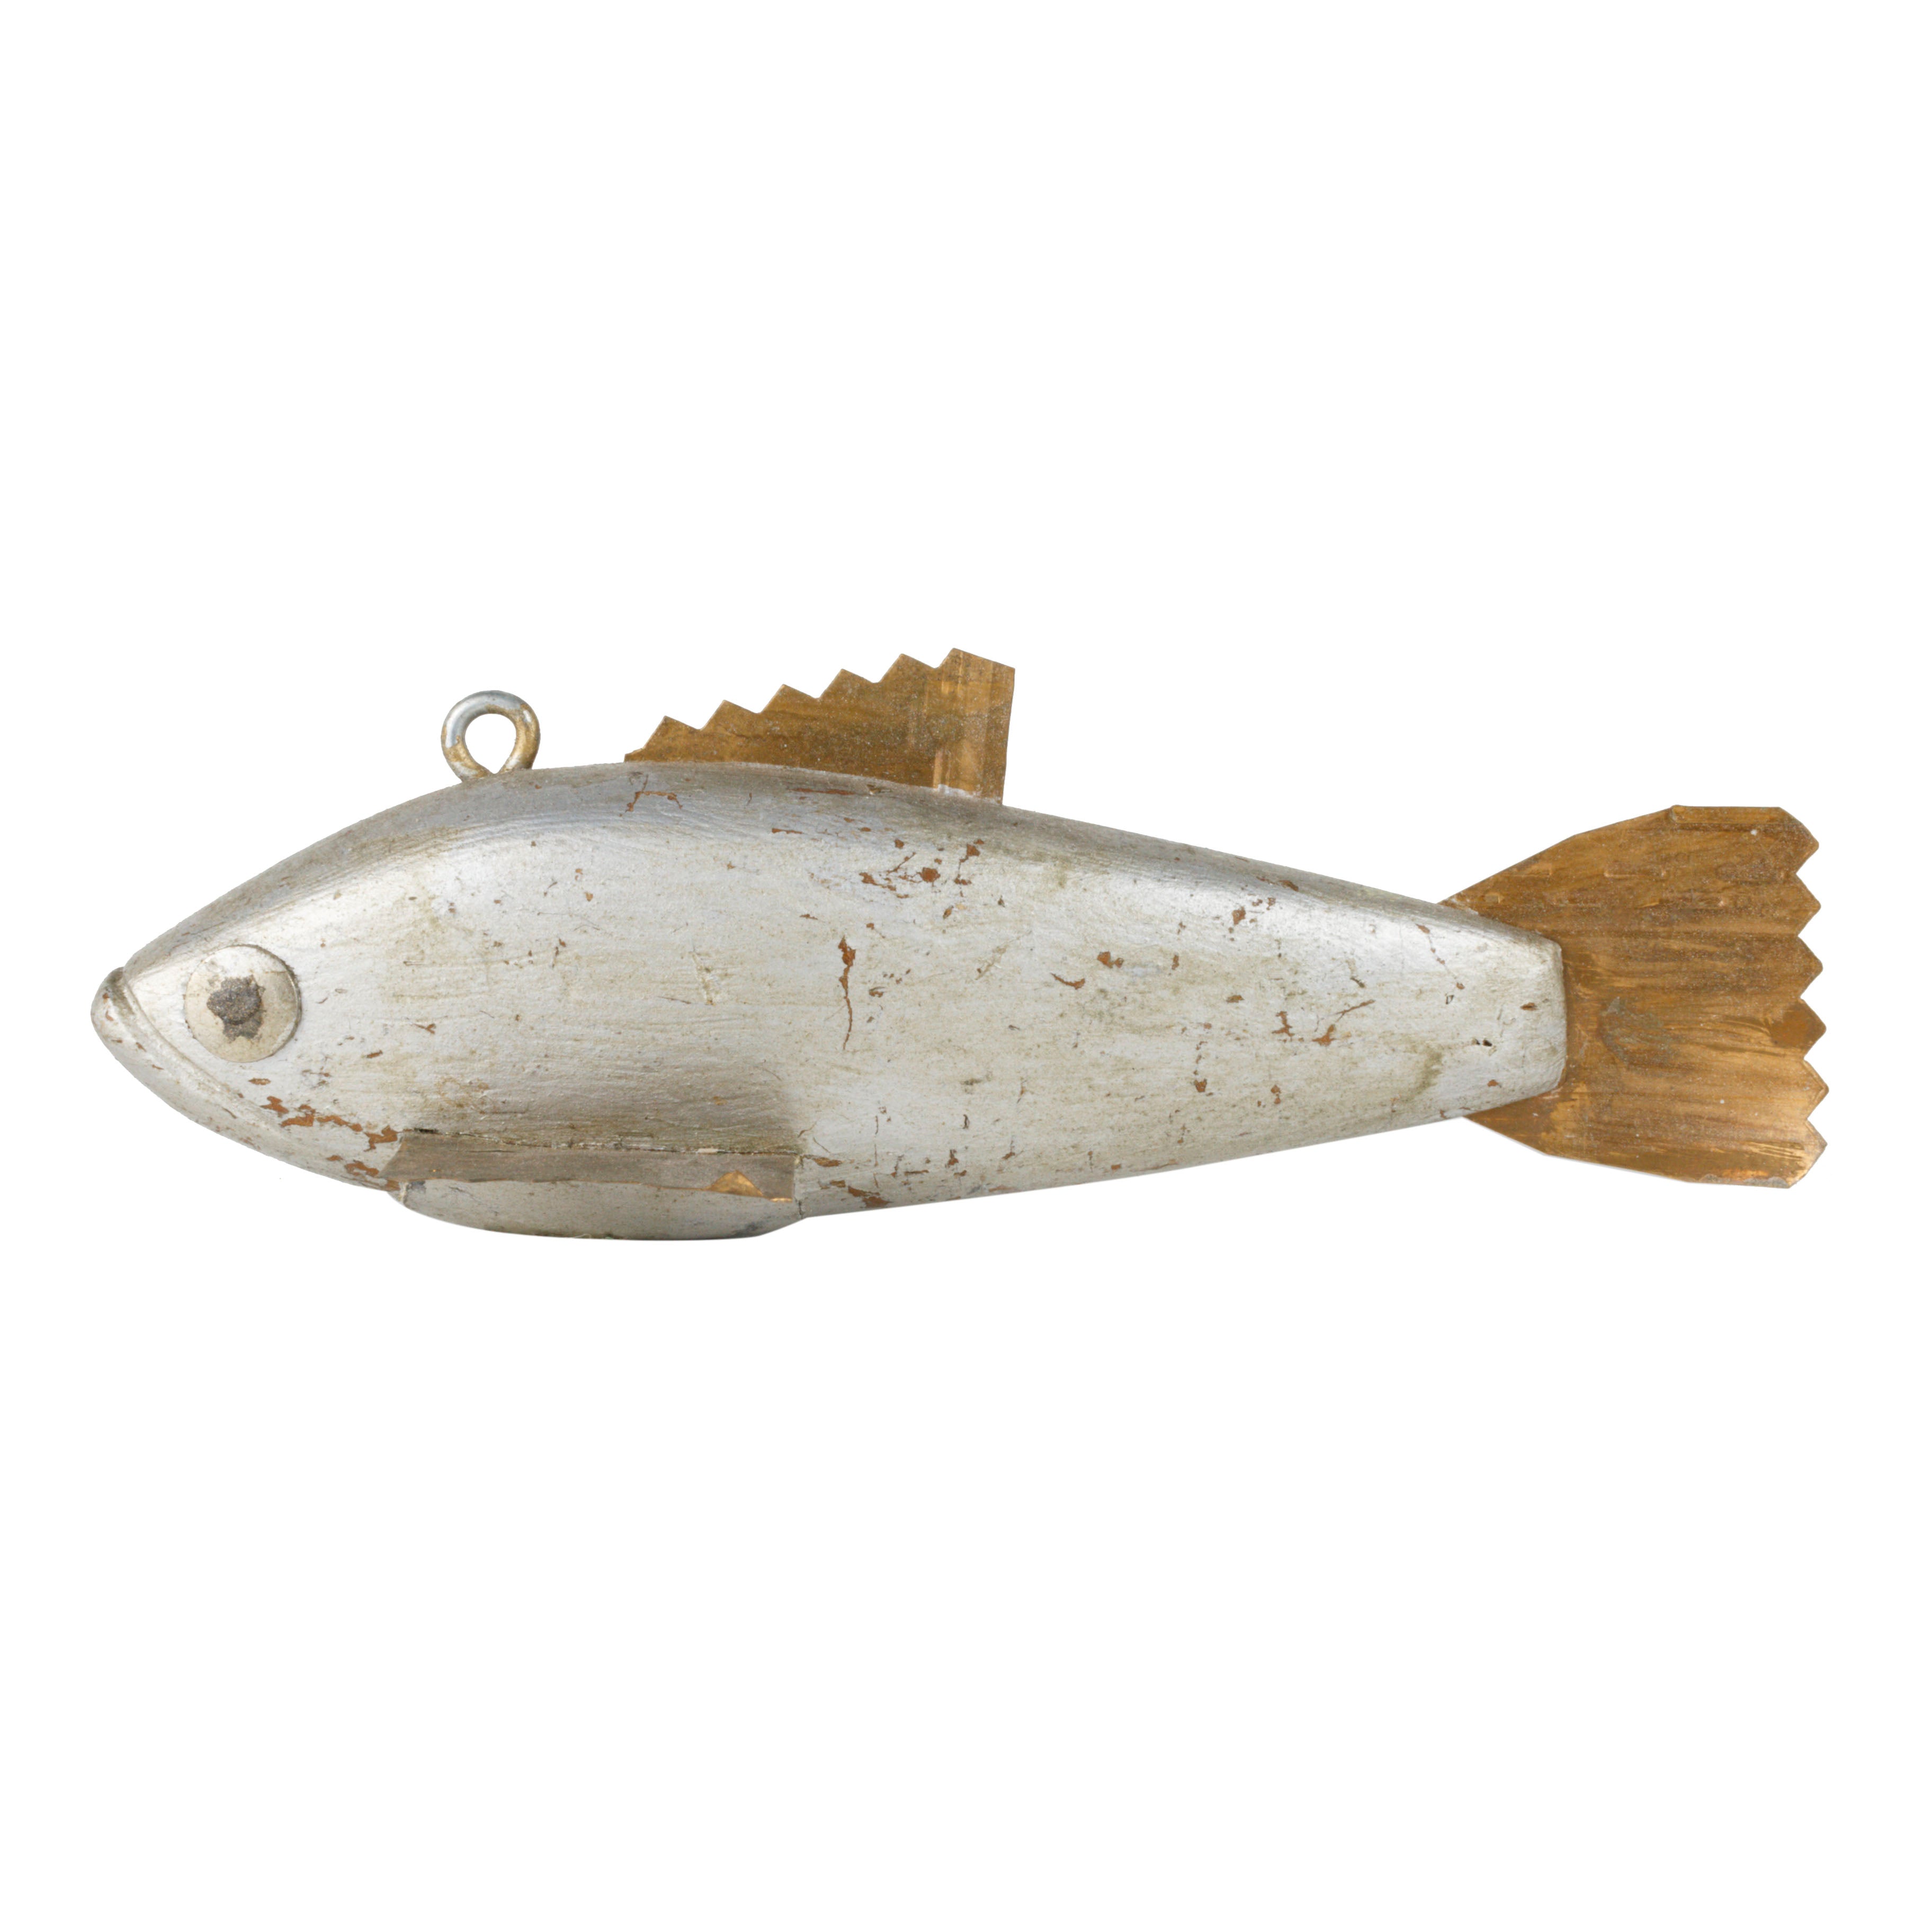 Silver and Copper Speafish Decoy, Sporting Goods, Fishing, Decoy